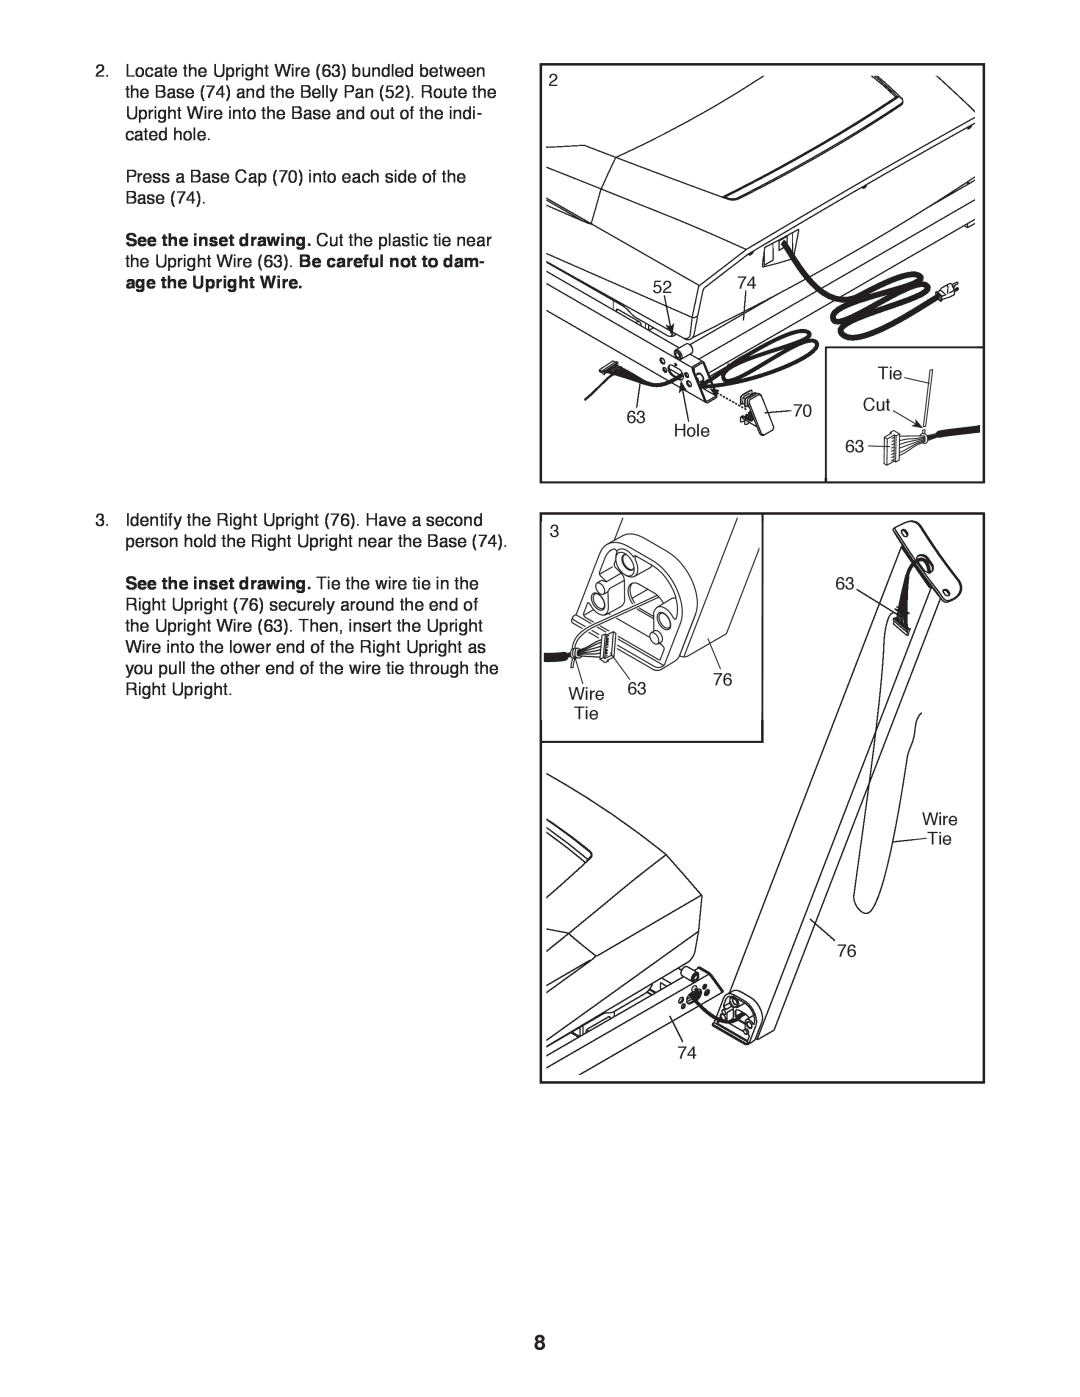 Weslo WLTL39312.0 user manual age the Upright Wire, See the inset drawing. Tie the wire tie in the 